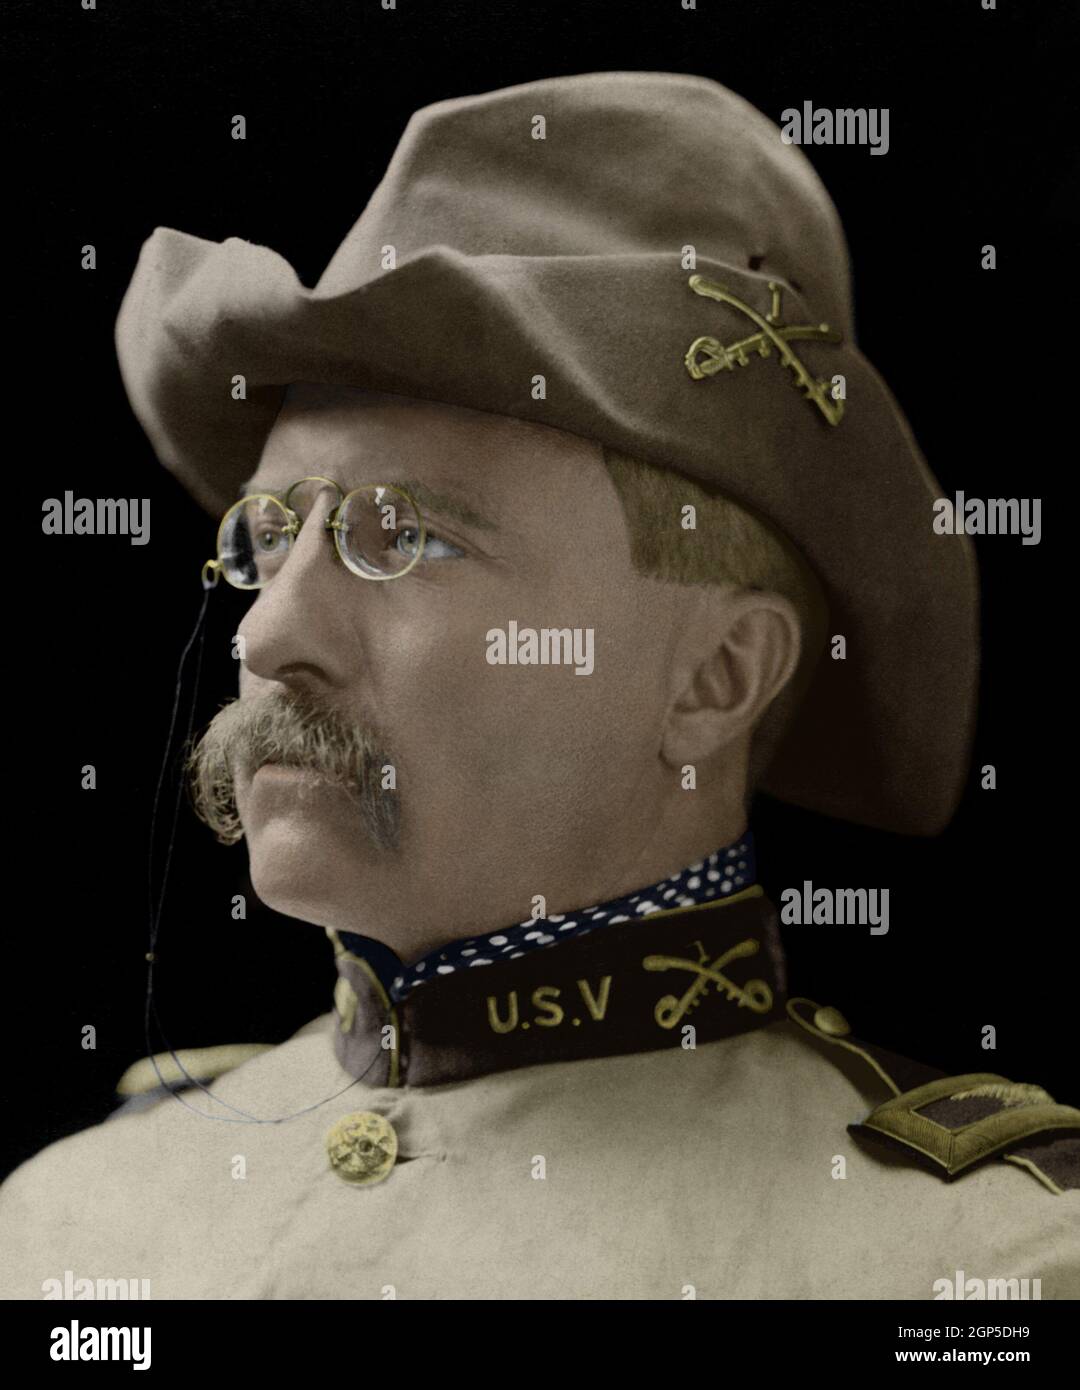 Colonel Theodore Roosevelt in the uniform of 1st United States Volunteer  Cavalry, Oct. 26, 1898, which he raised to fight in the Spanish American  War, 1898-1898. He wears a slouch hat and